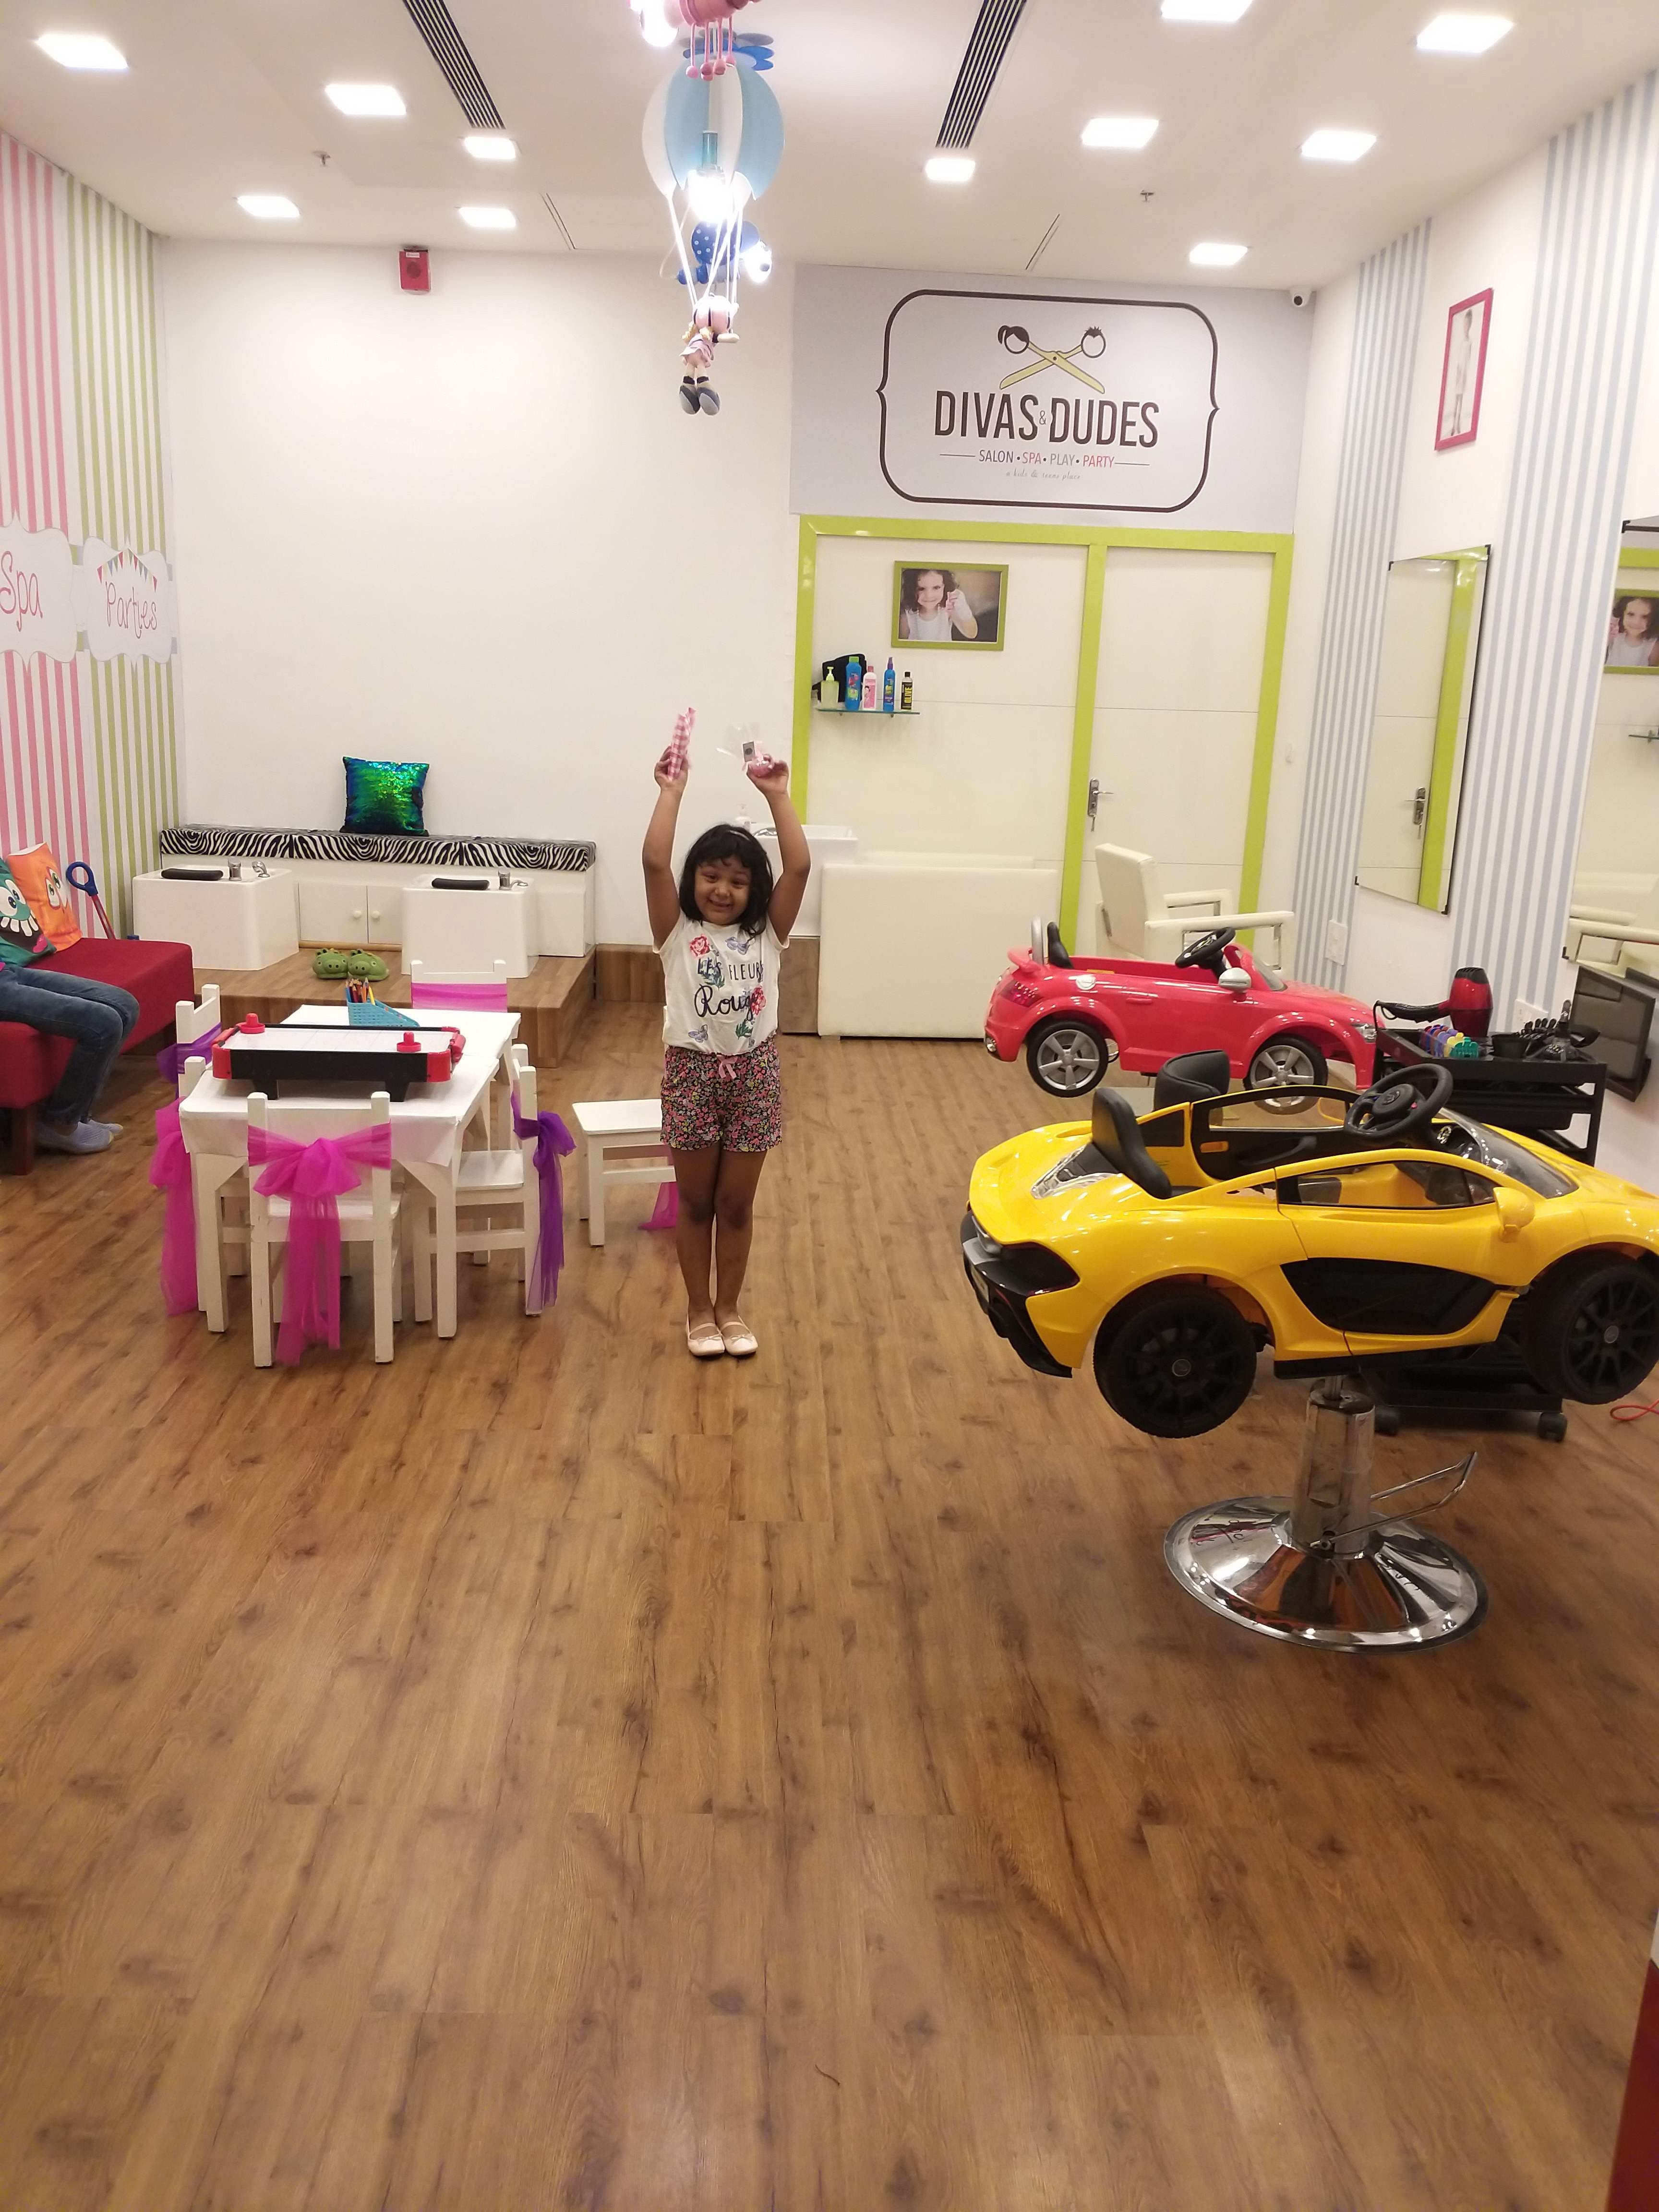 This Kids Salon Is All You Want For A Fuss Free Hair Cut With Board Games!  | LBB